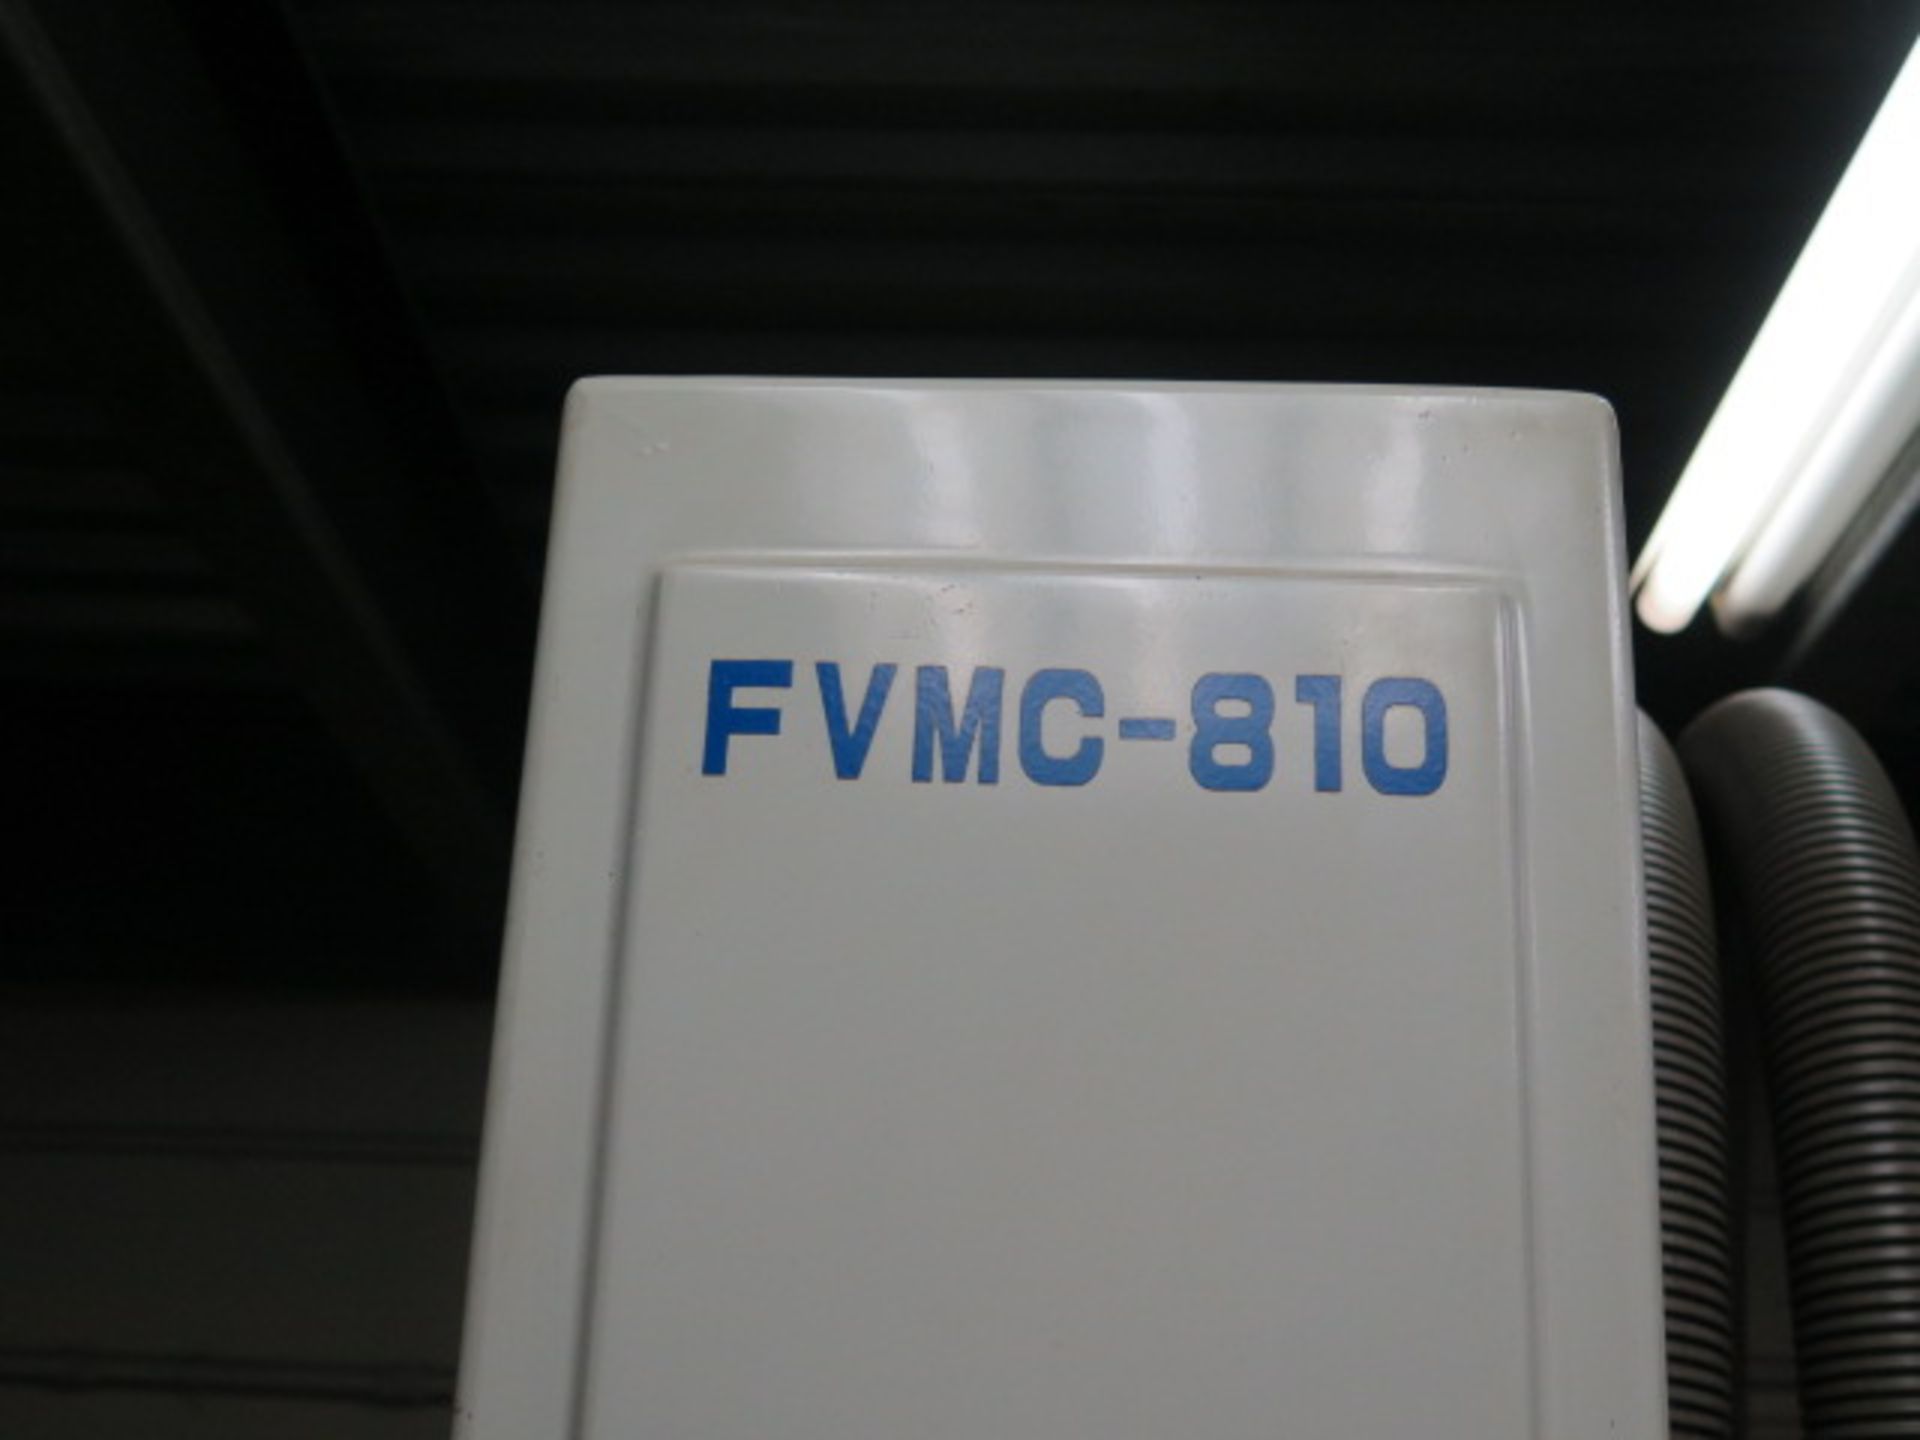 Acra FVMC-810 CNC VMC s/n V3013 w/ Mitsubishi Controls, 16-Station ATC, SOLD AS IS - Image 11 of 12